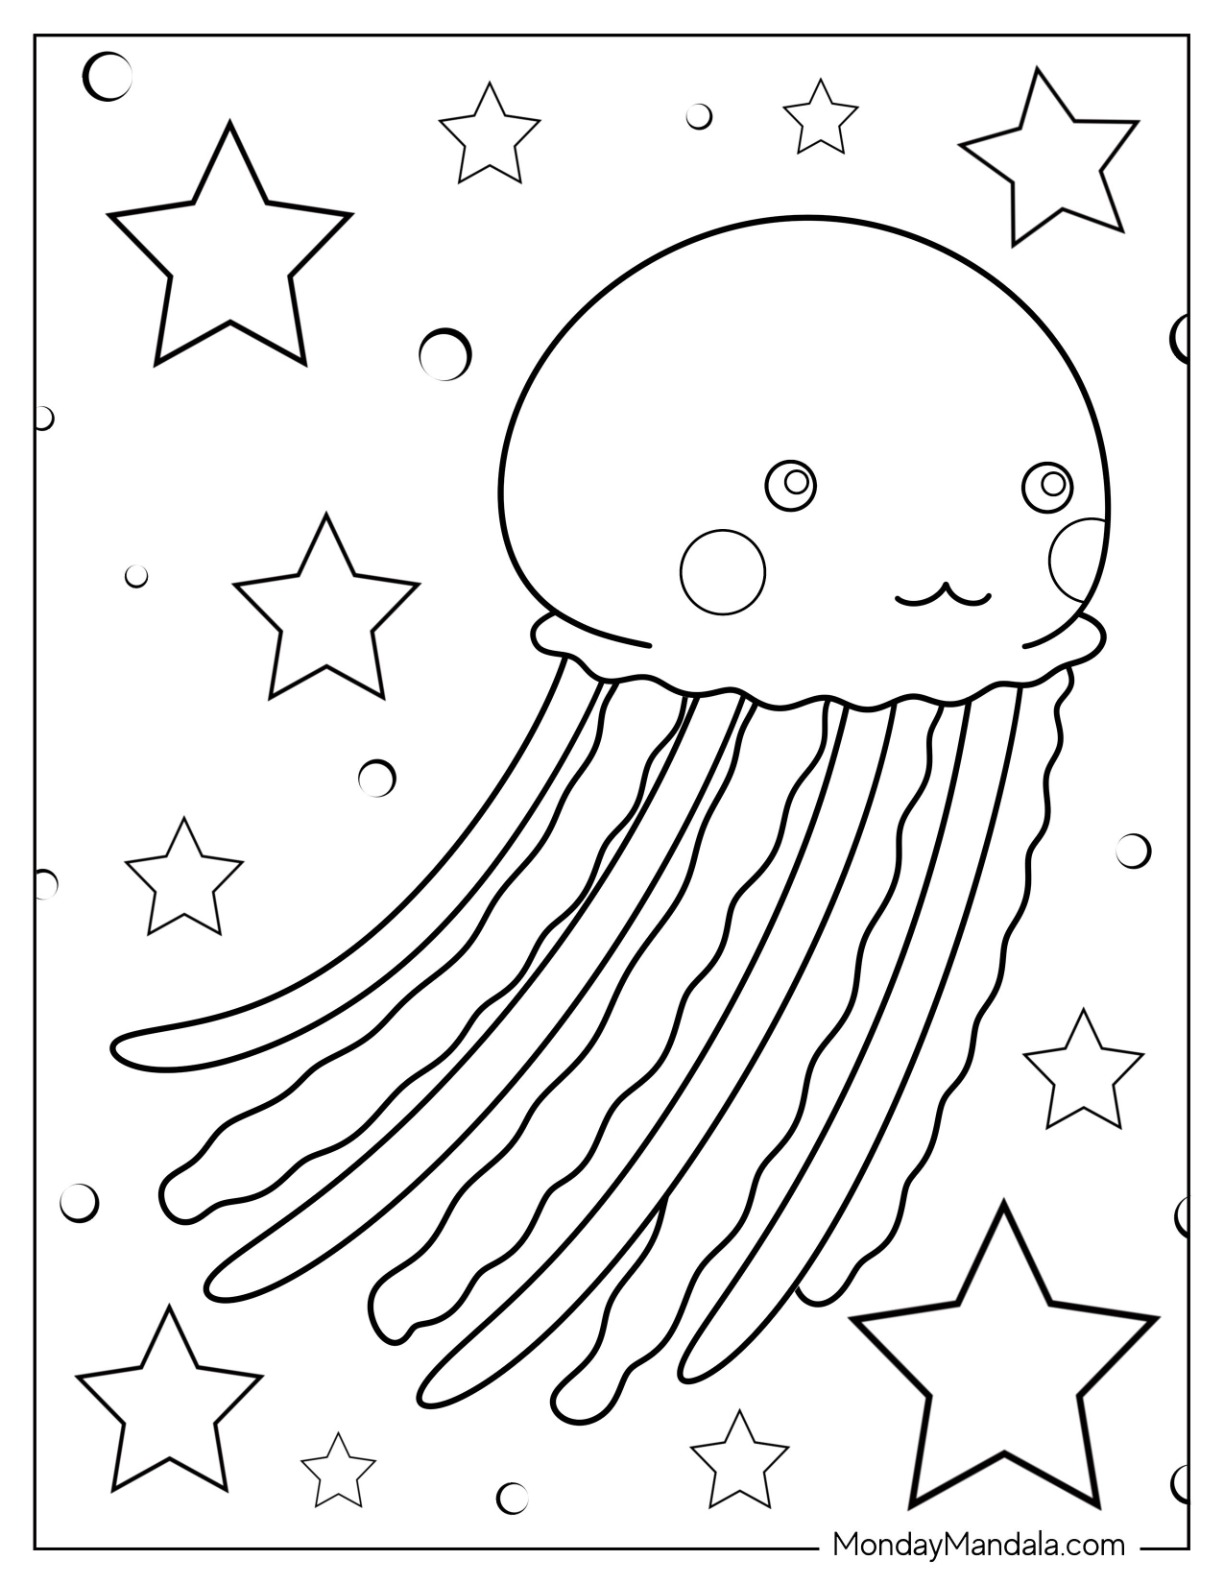 Jellyfish coloring pages free pdf printables